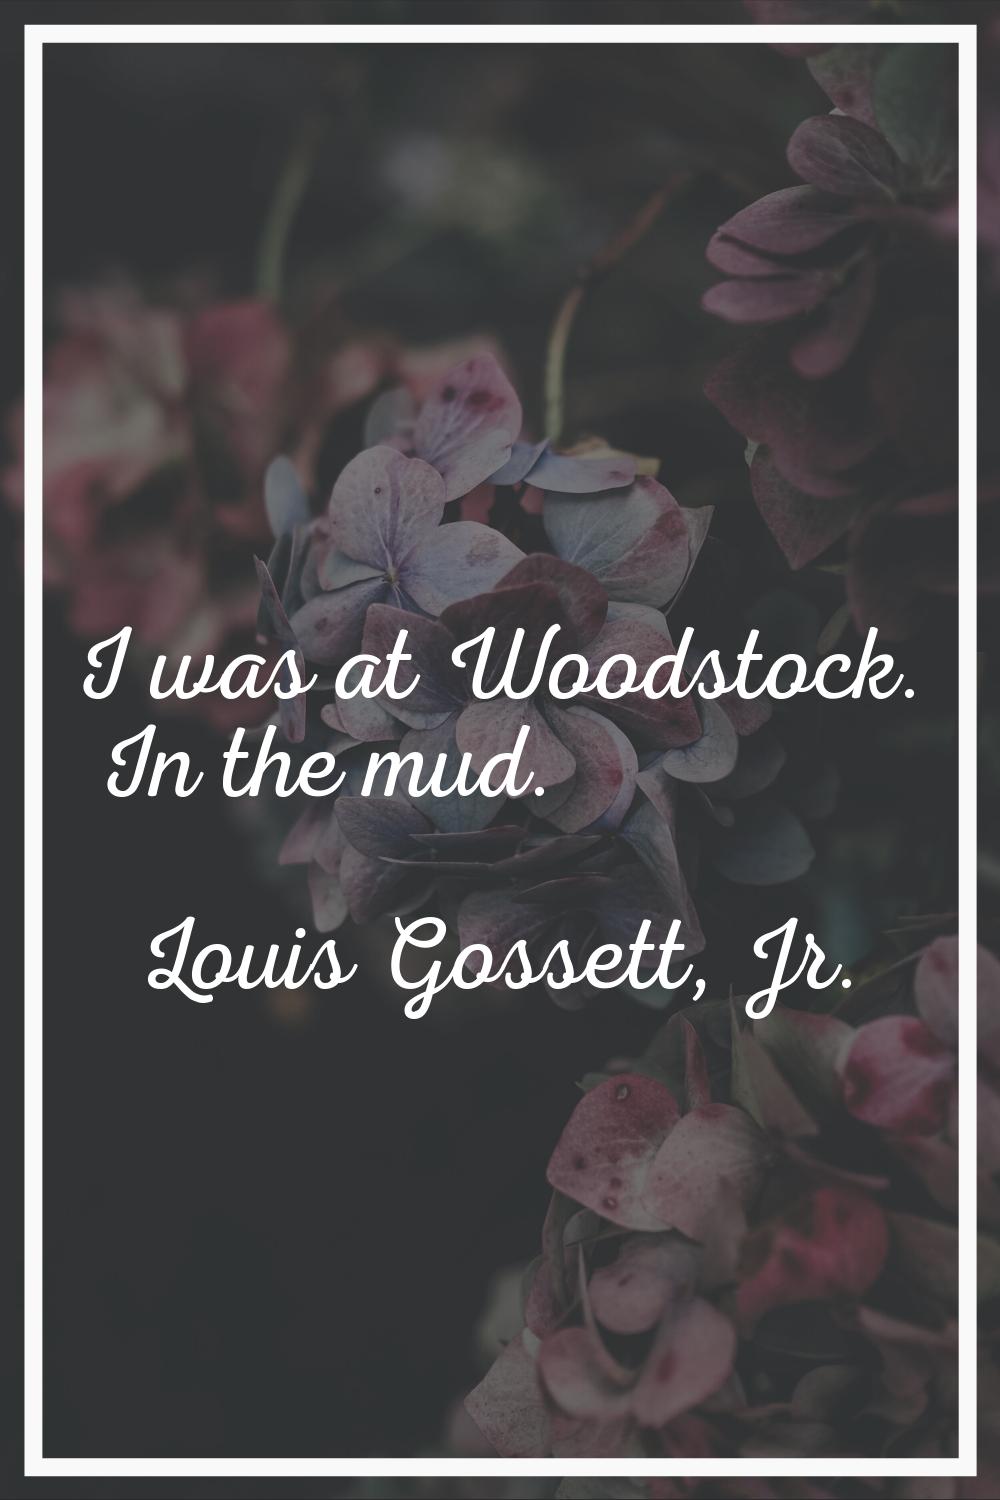 I was at Woodstock. In the mud.